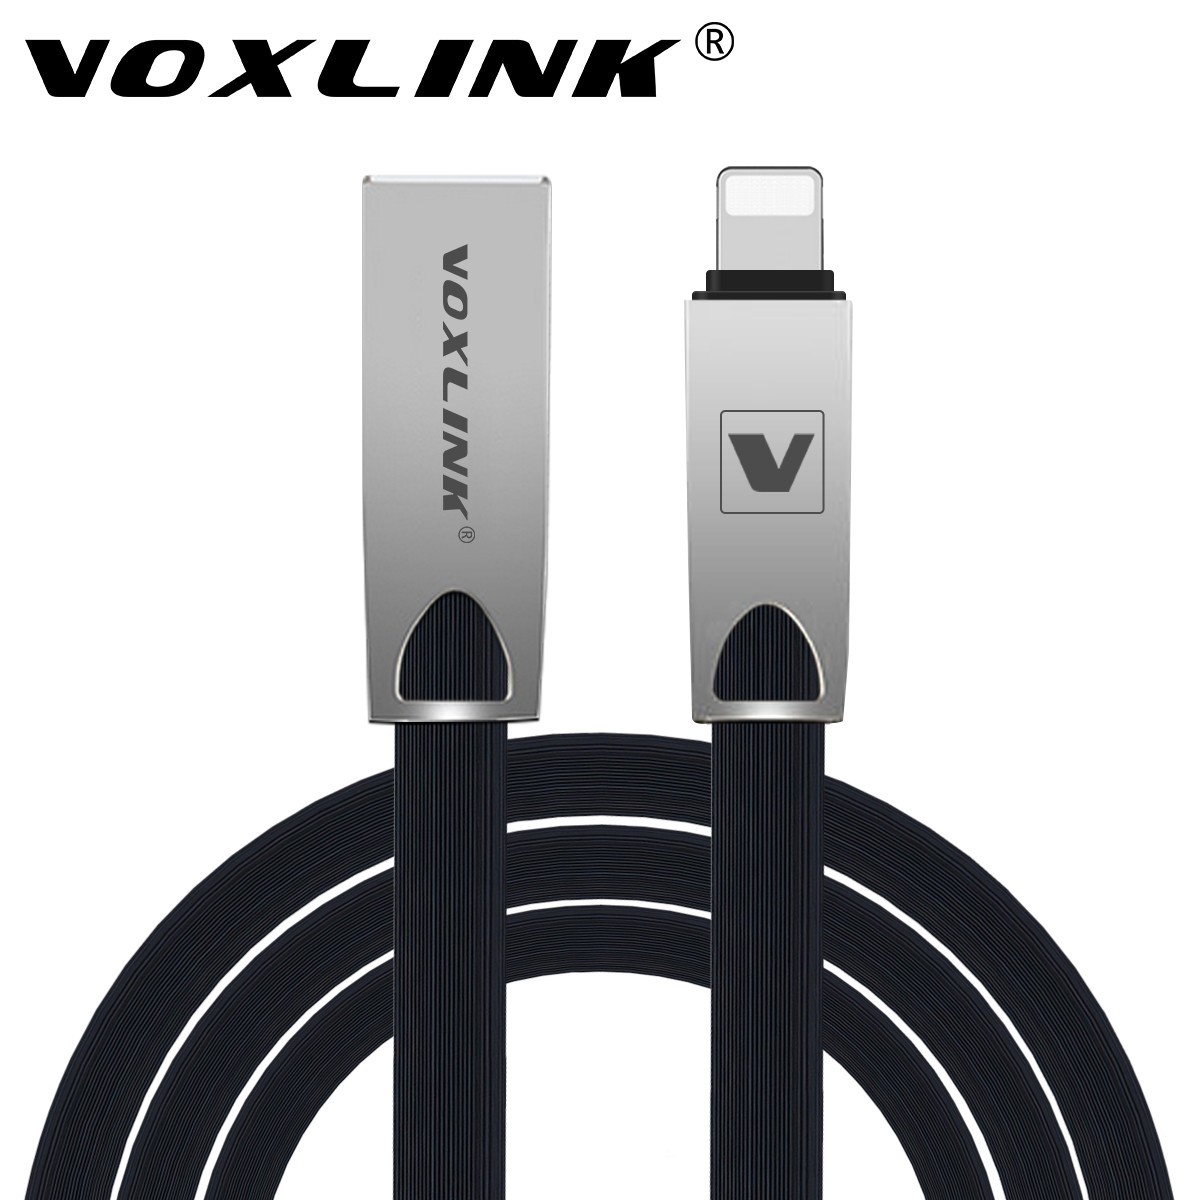 VOXLINK For iPhone iOS 10 9, Zinc Alloy Plug Flat PVC Wire Sync Data Charging USB Cable for iPhone 7 6 6s Plus 5 5s iPad Air black 1m